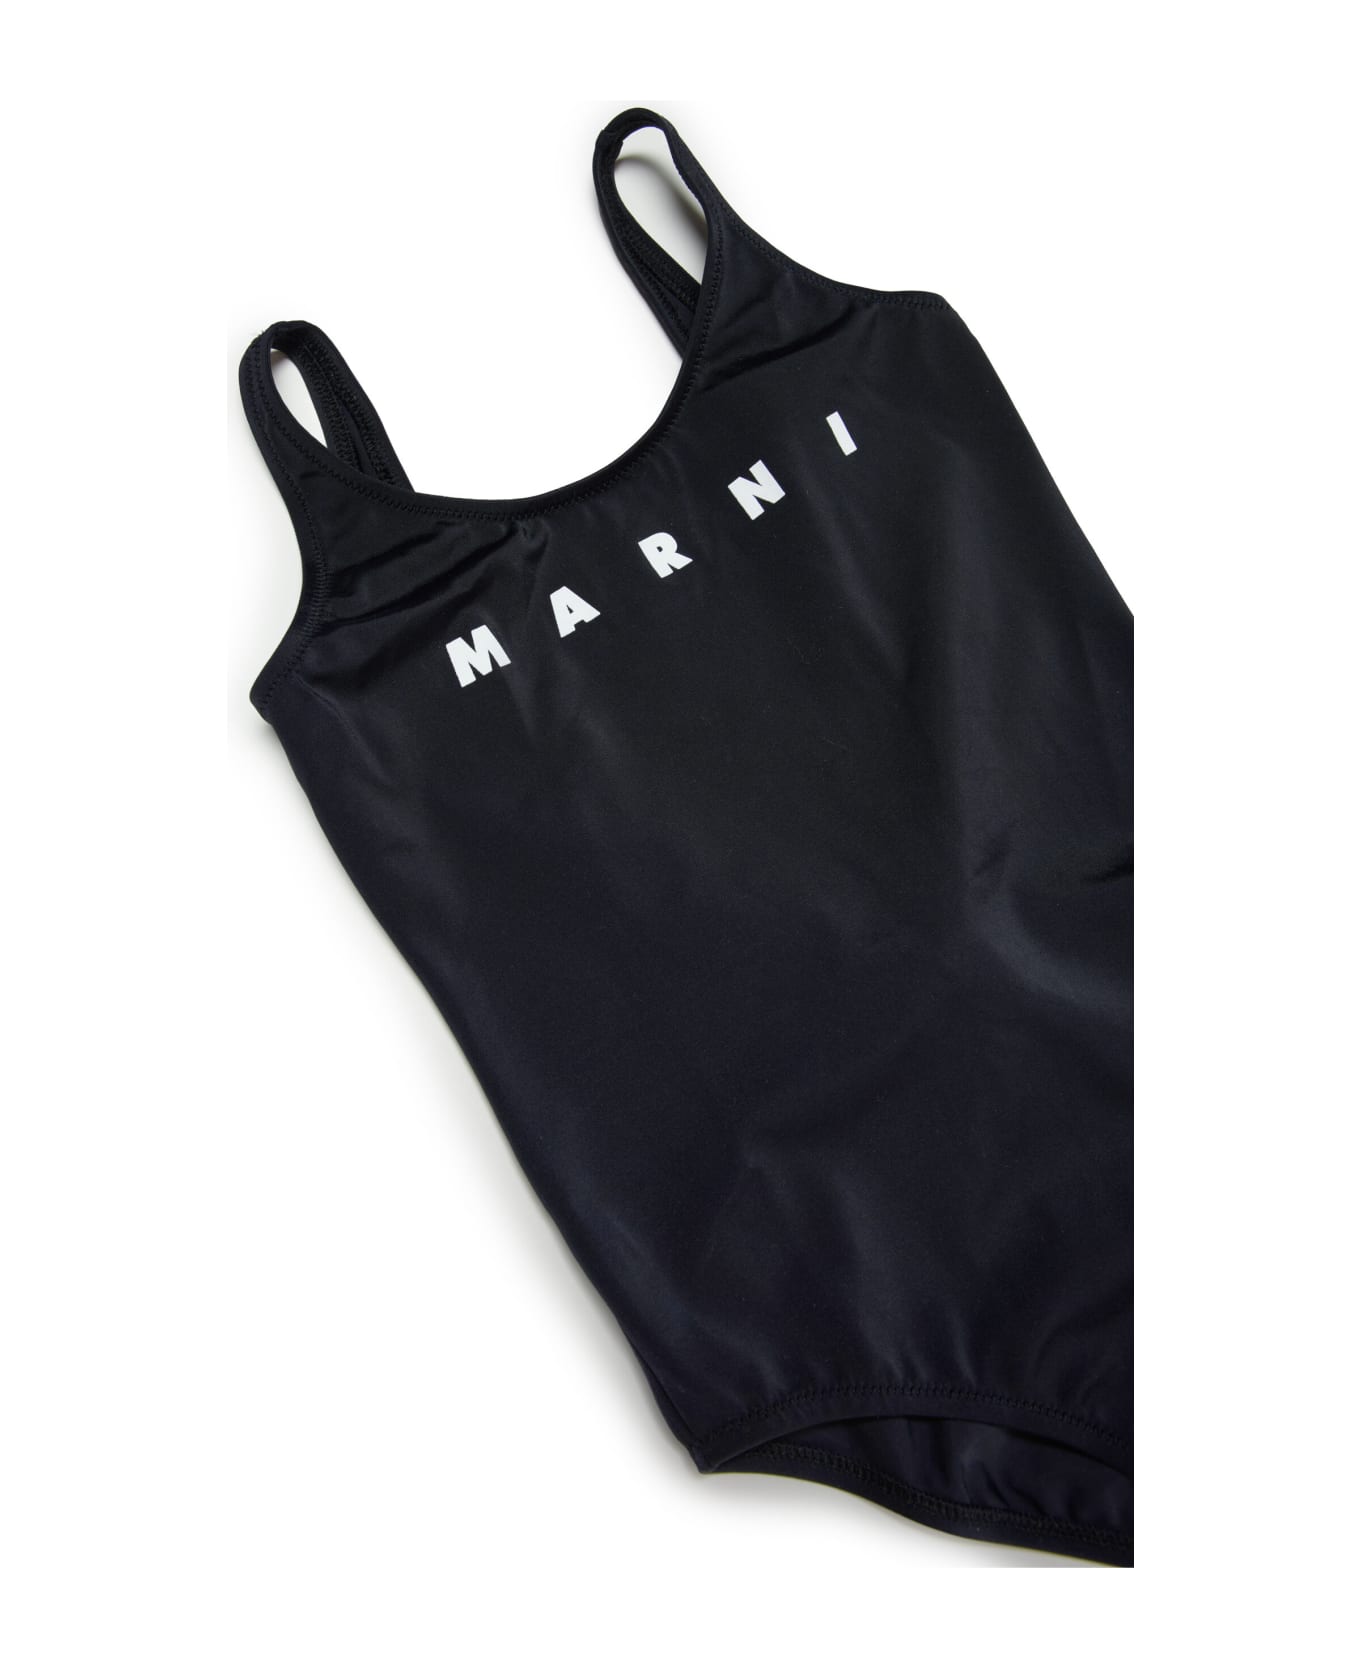 Marni Mm9f Swimsuit Marni Black One-piece Swimming Costume In Lycra With Logo - Black